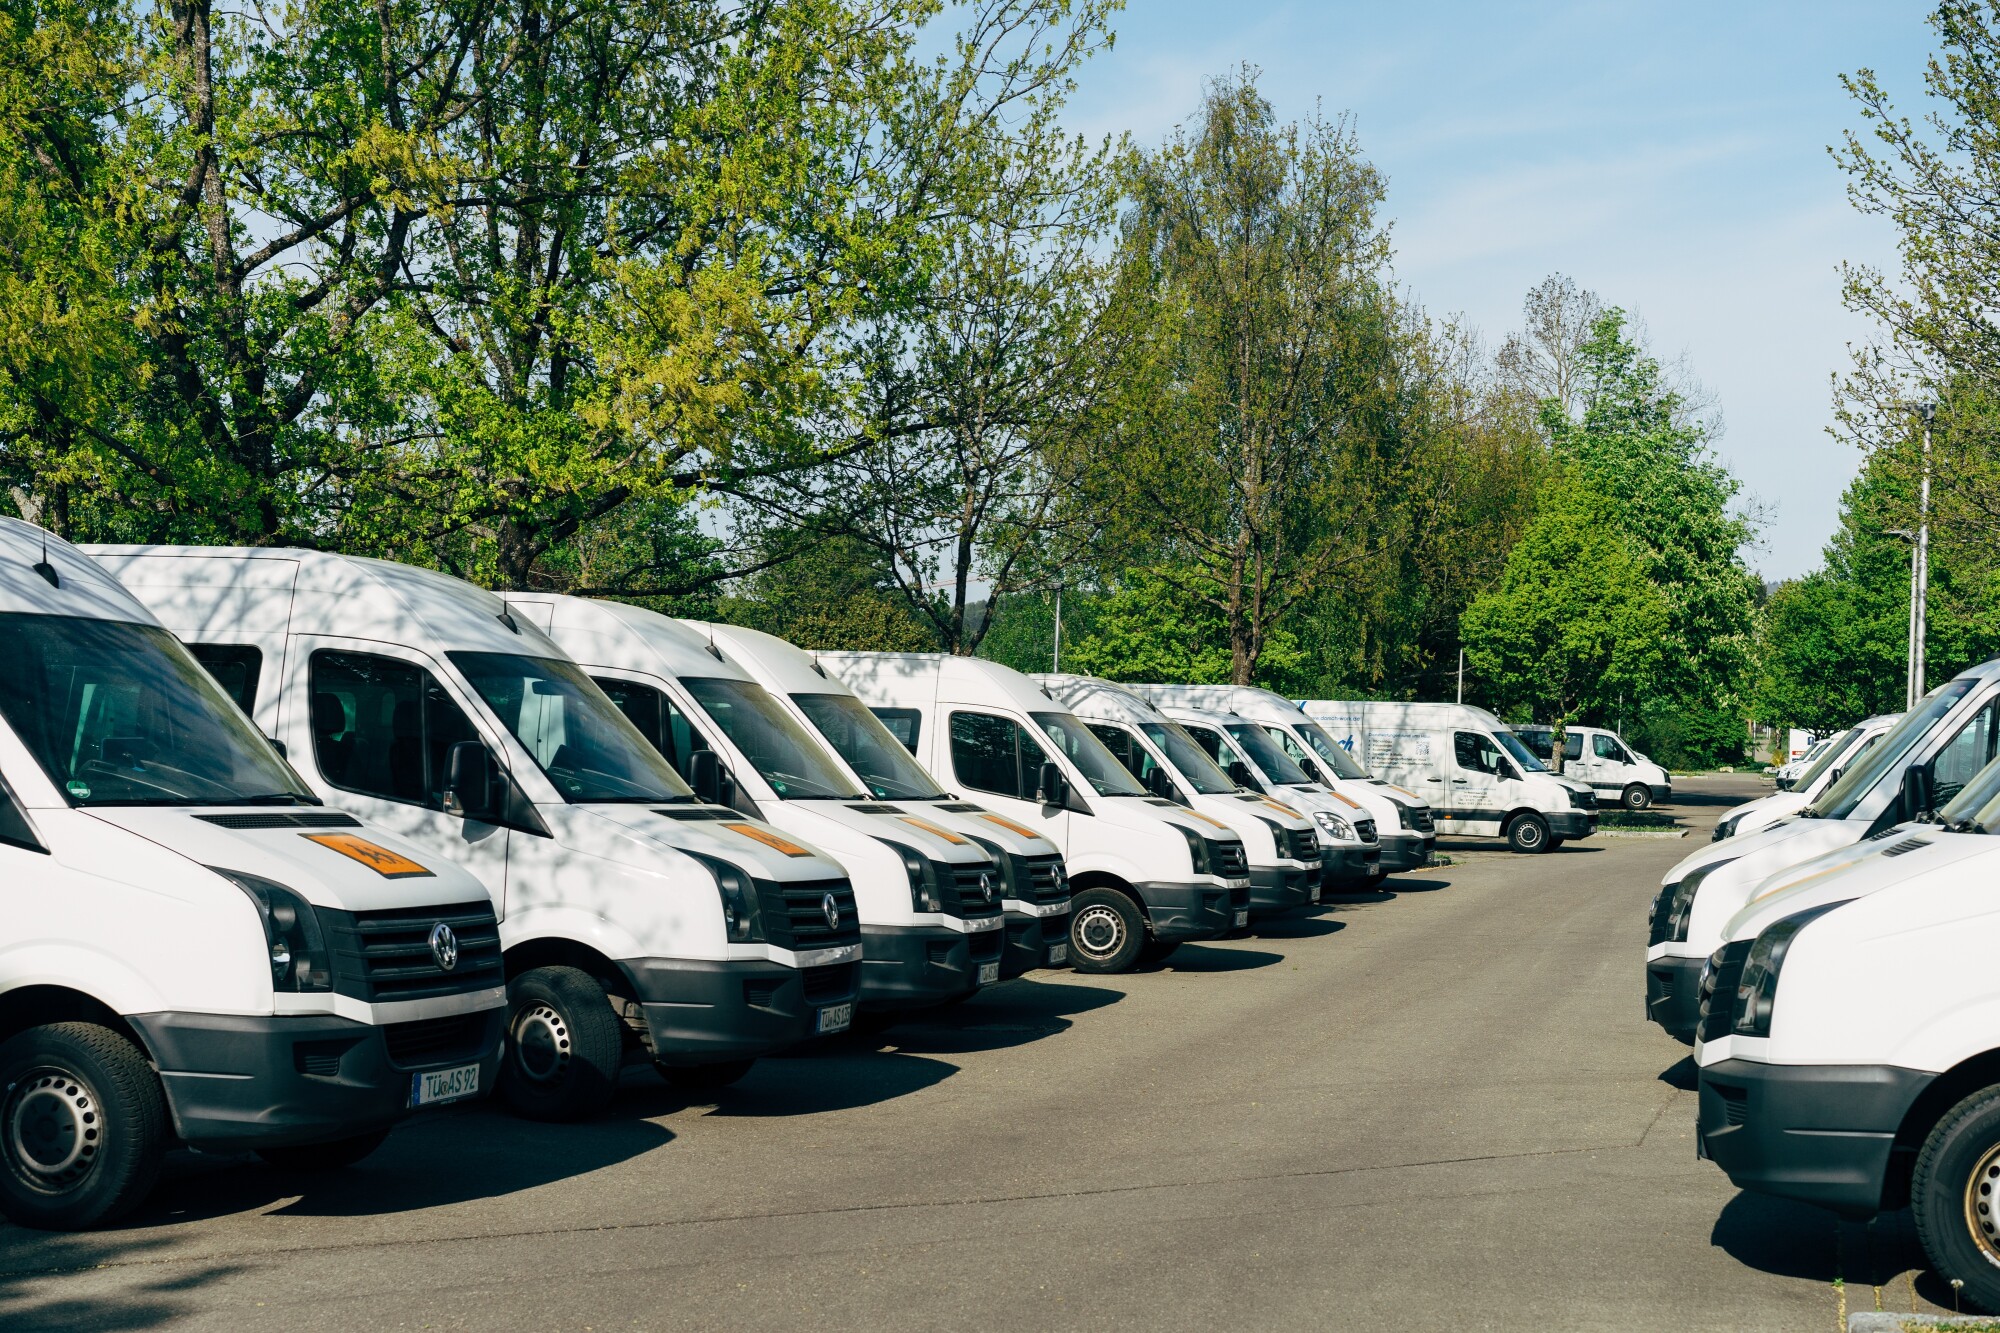 7 Fleet Management Solutions to Save Time and Money